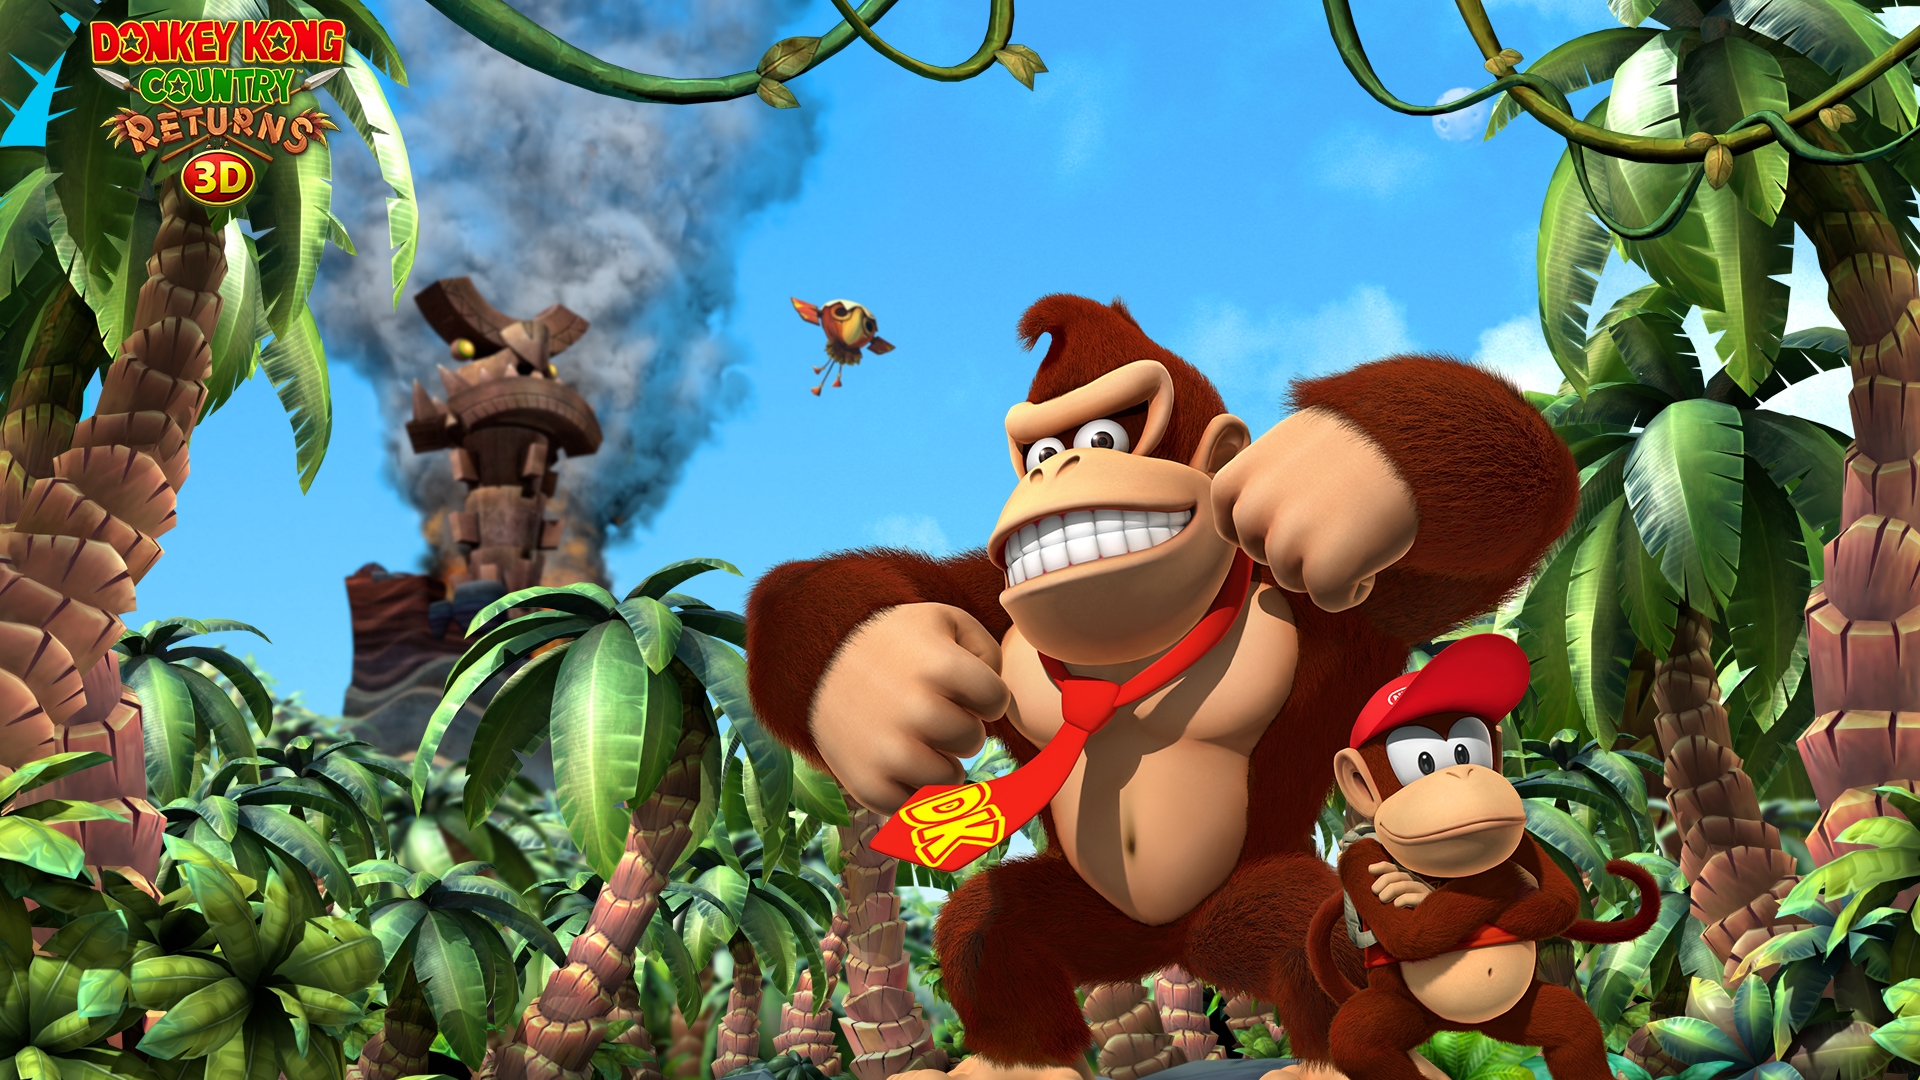 Video Game Donkey Kong Country Returns 3D 1920x1080